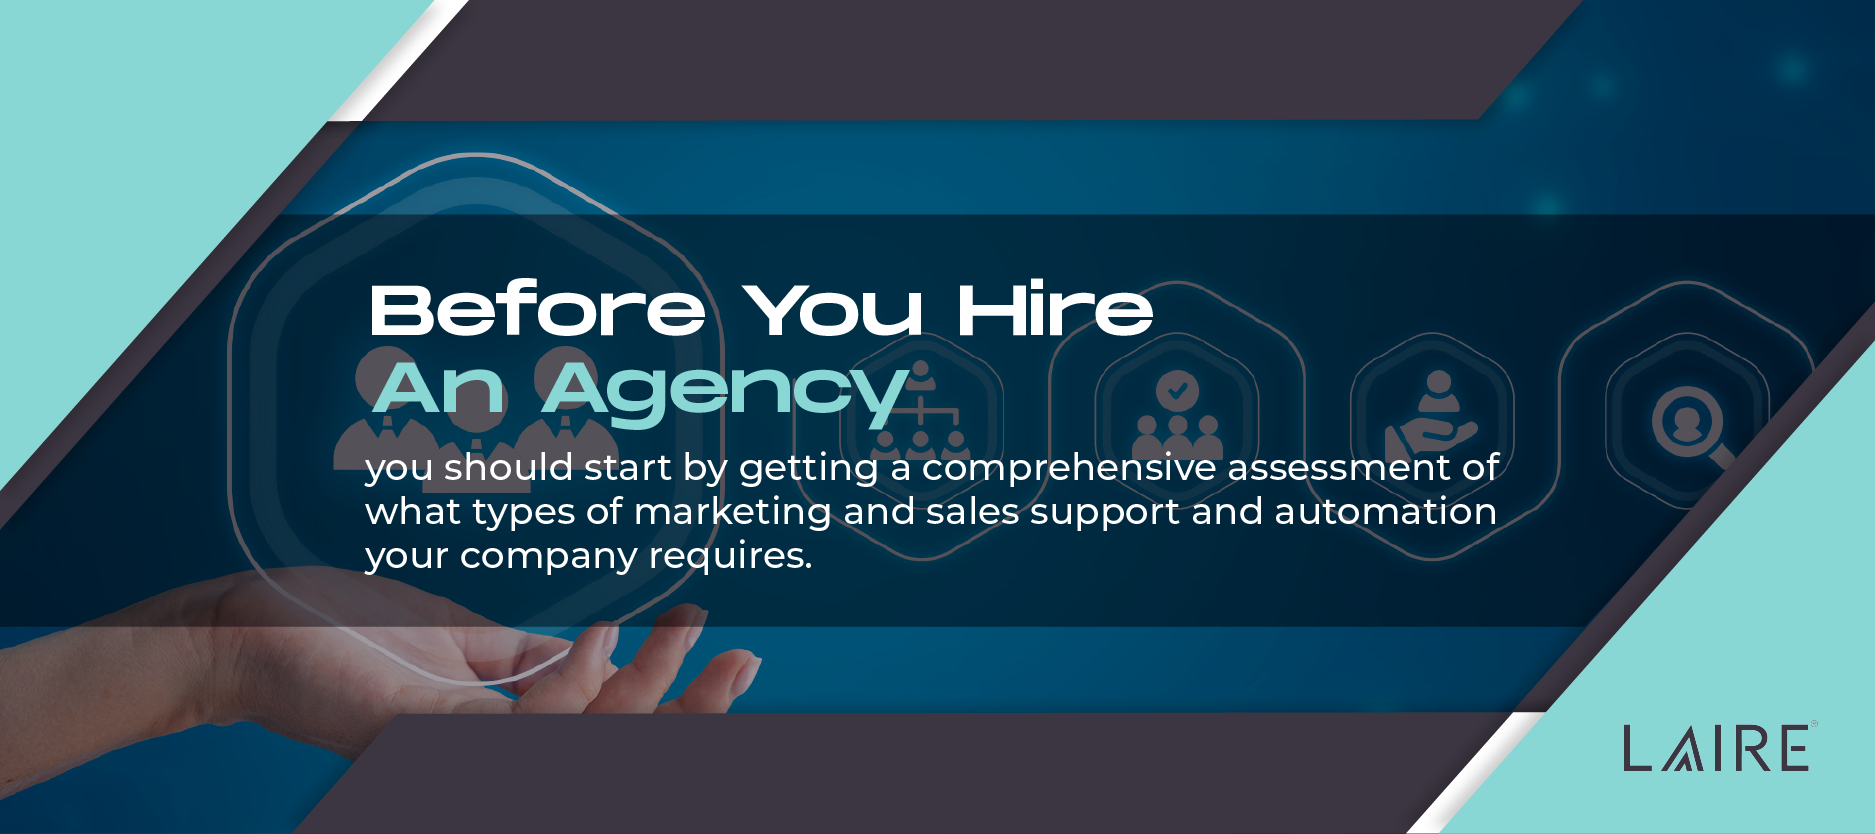 Before you go about hiring an agency, you should start by getting a comprehensive assessment of what types of marketing and sales support and automation your company requires.